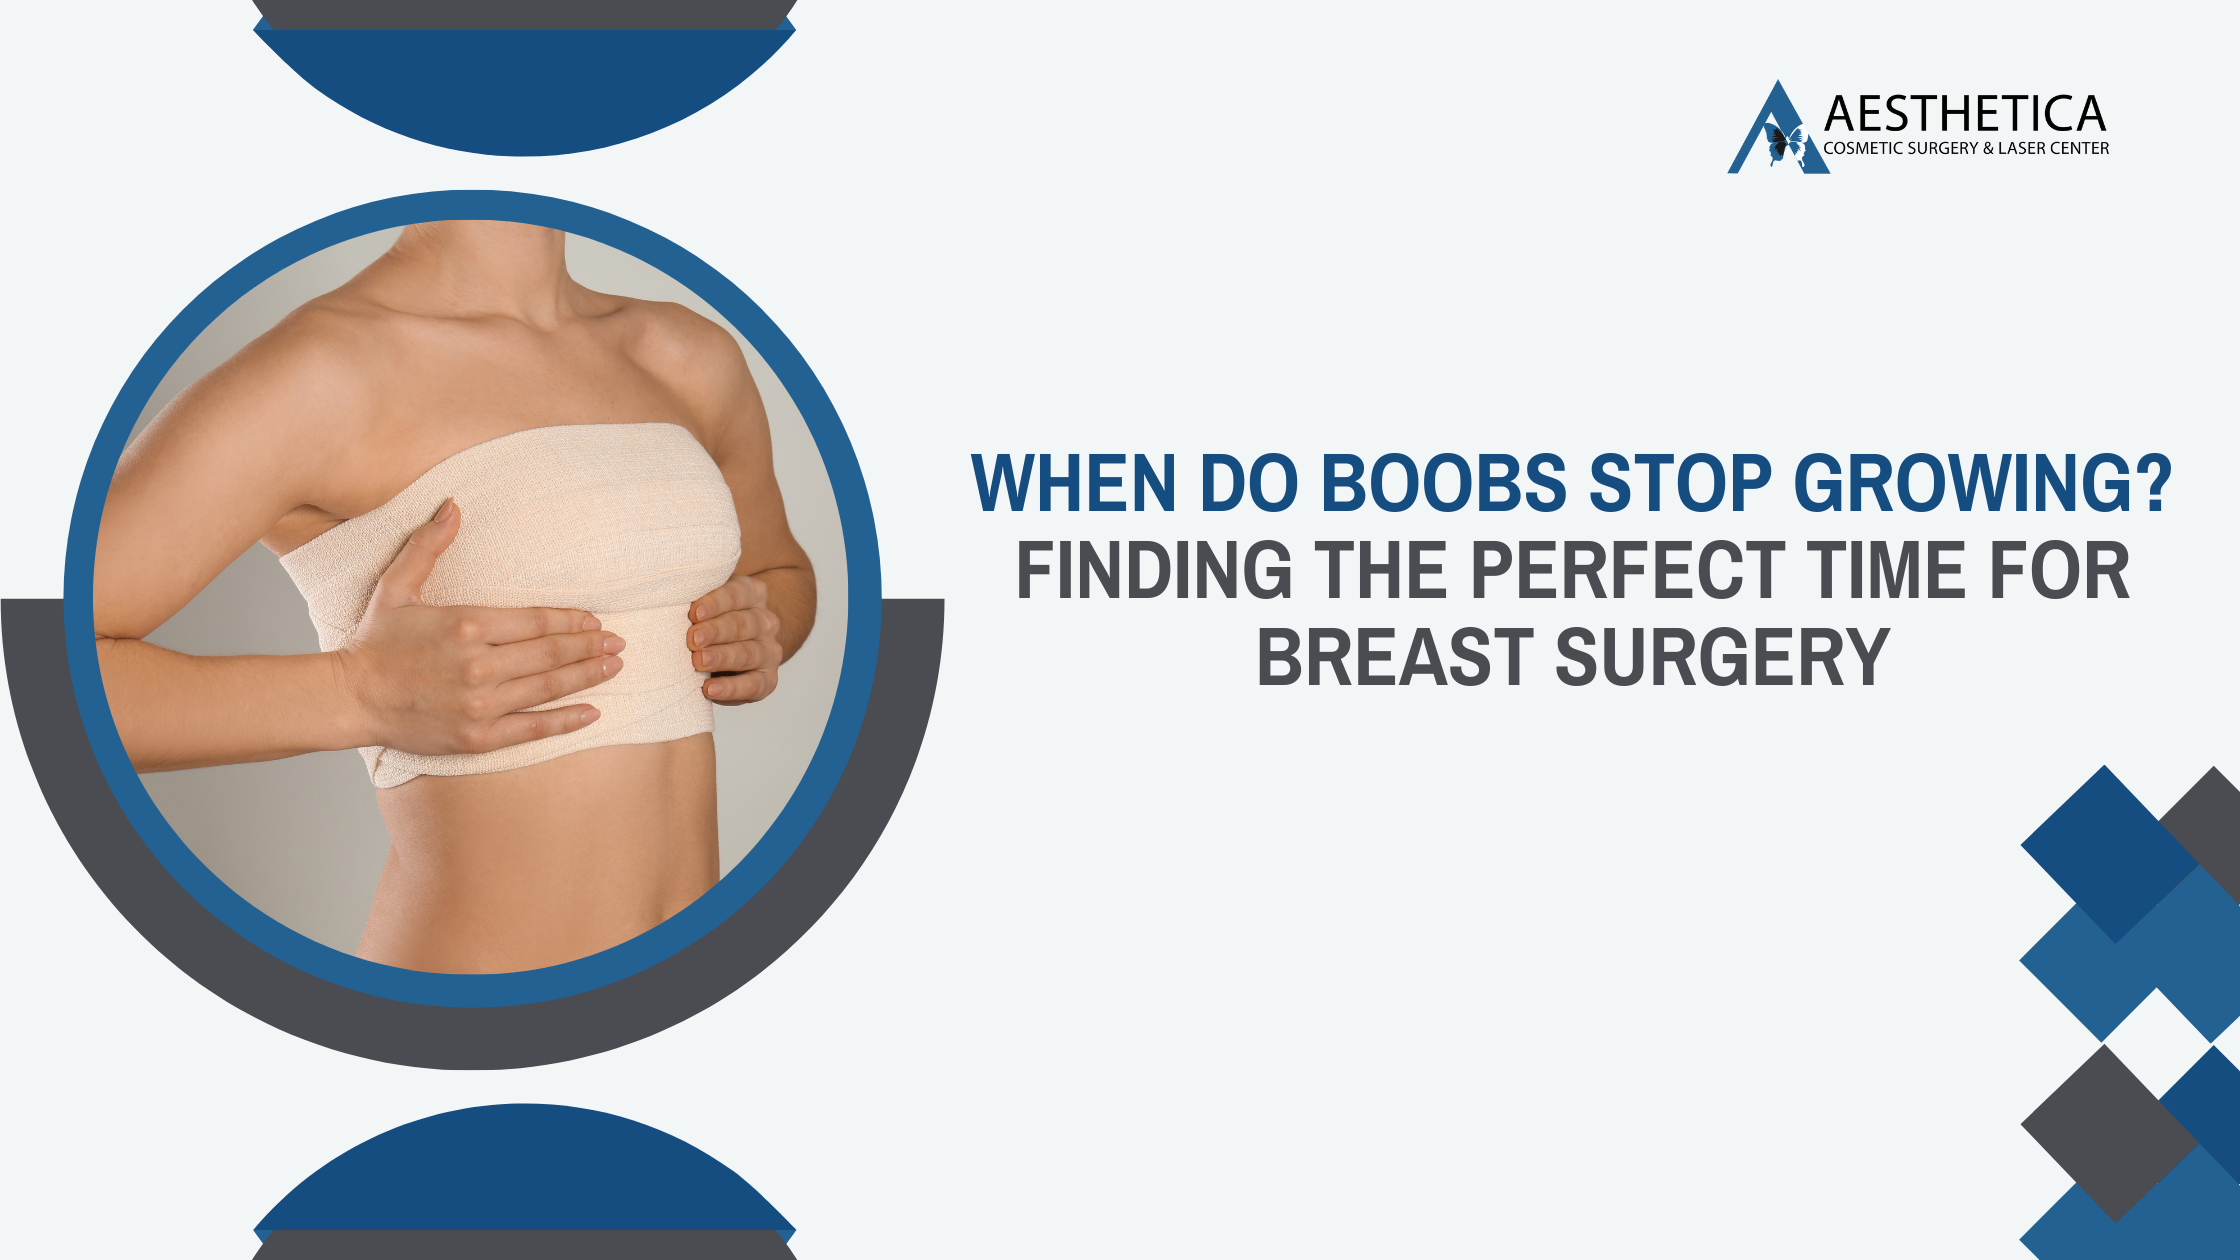 When Do Boobs Stop Growing? Finding the Perfect Time for Breast Surgery